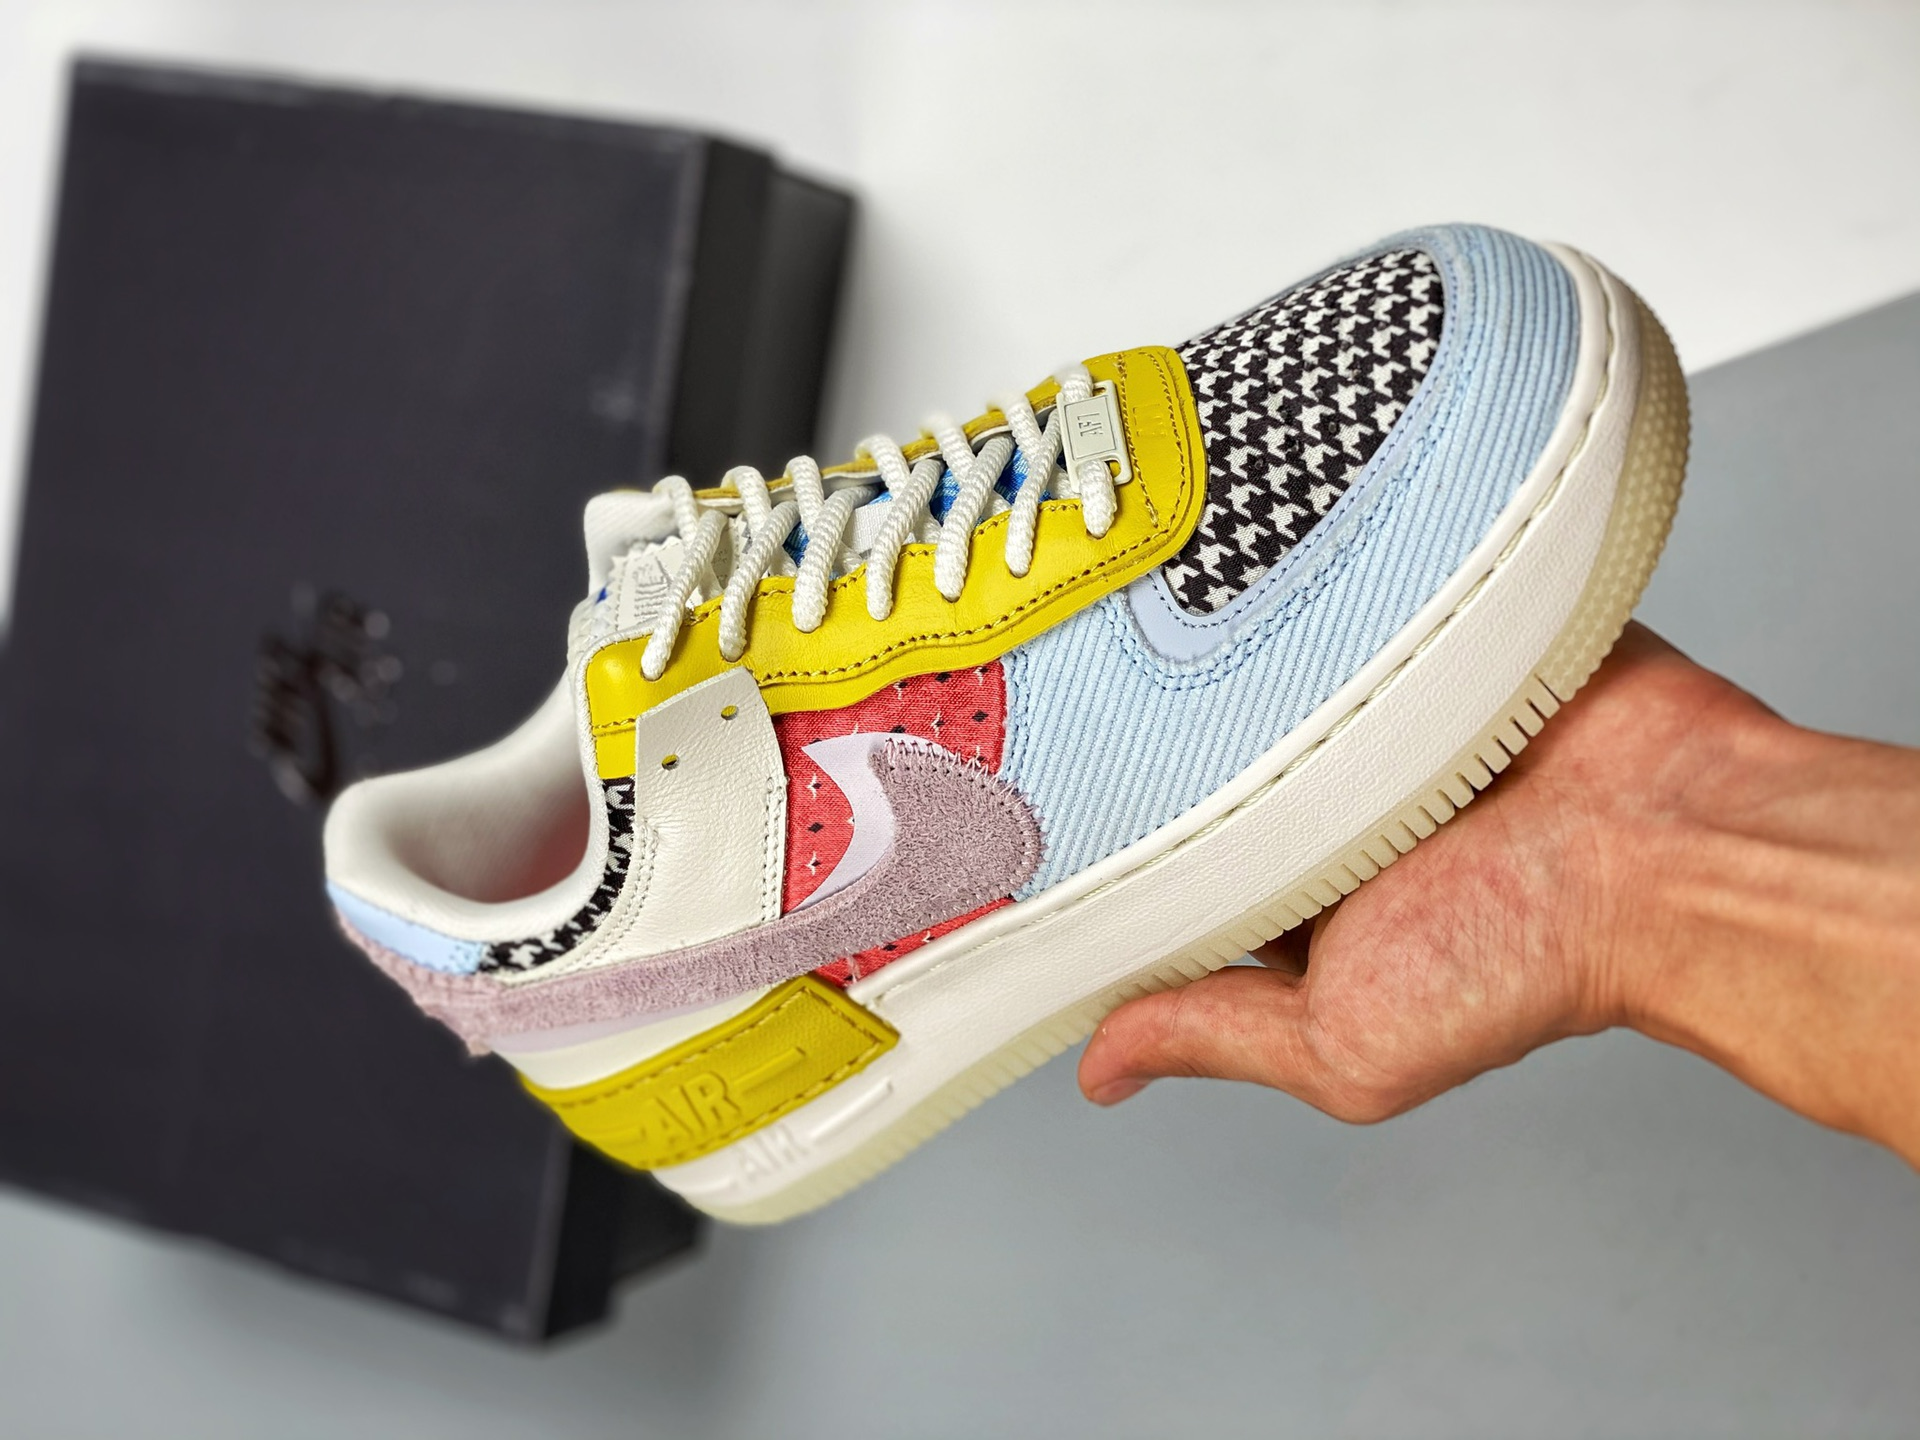 Buy Wmns Air Force 1 Shadow 'Patchwork' - DM8076 100